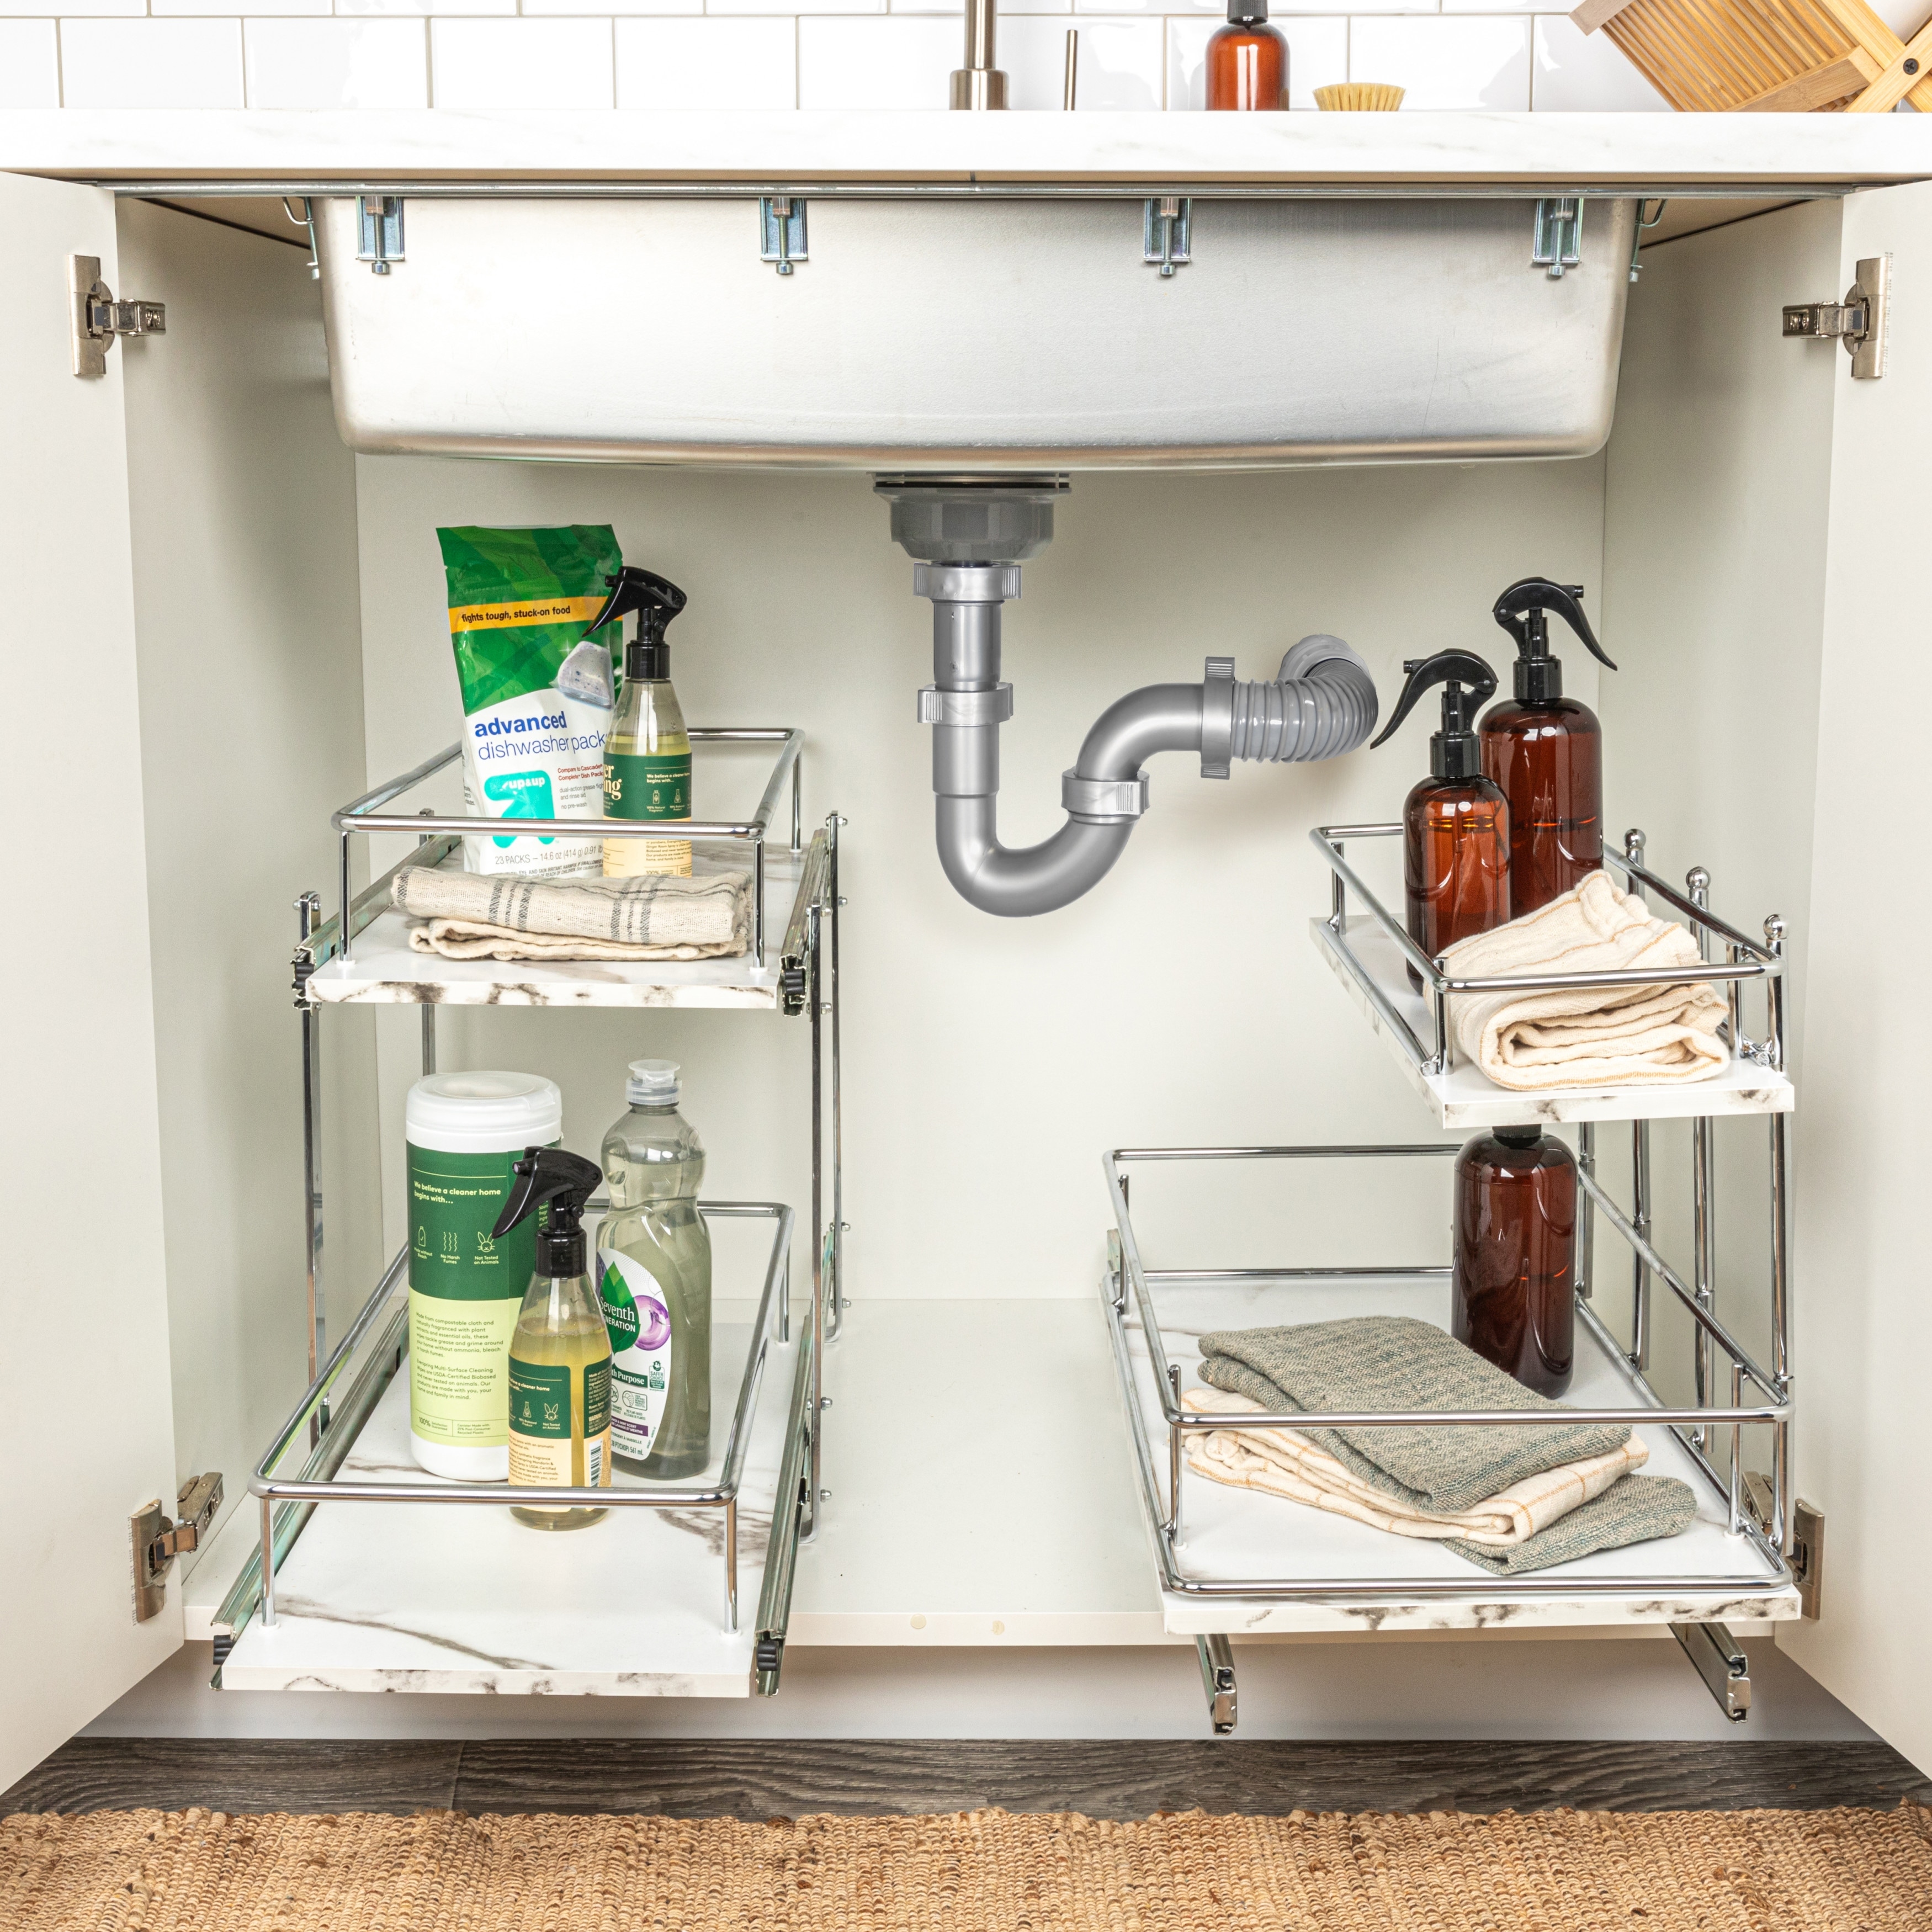 https://ak1.ostkcdn.com/images/products/is/images/direct/a7329390a988dd829e72f2e89005b92004df6a61/Glidez-2-Tier-Slide-Out-Under-Cabinet-Organizer.jpg